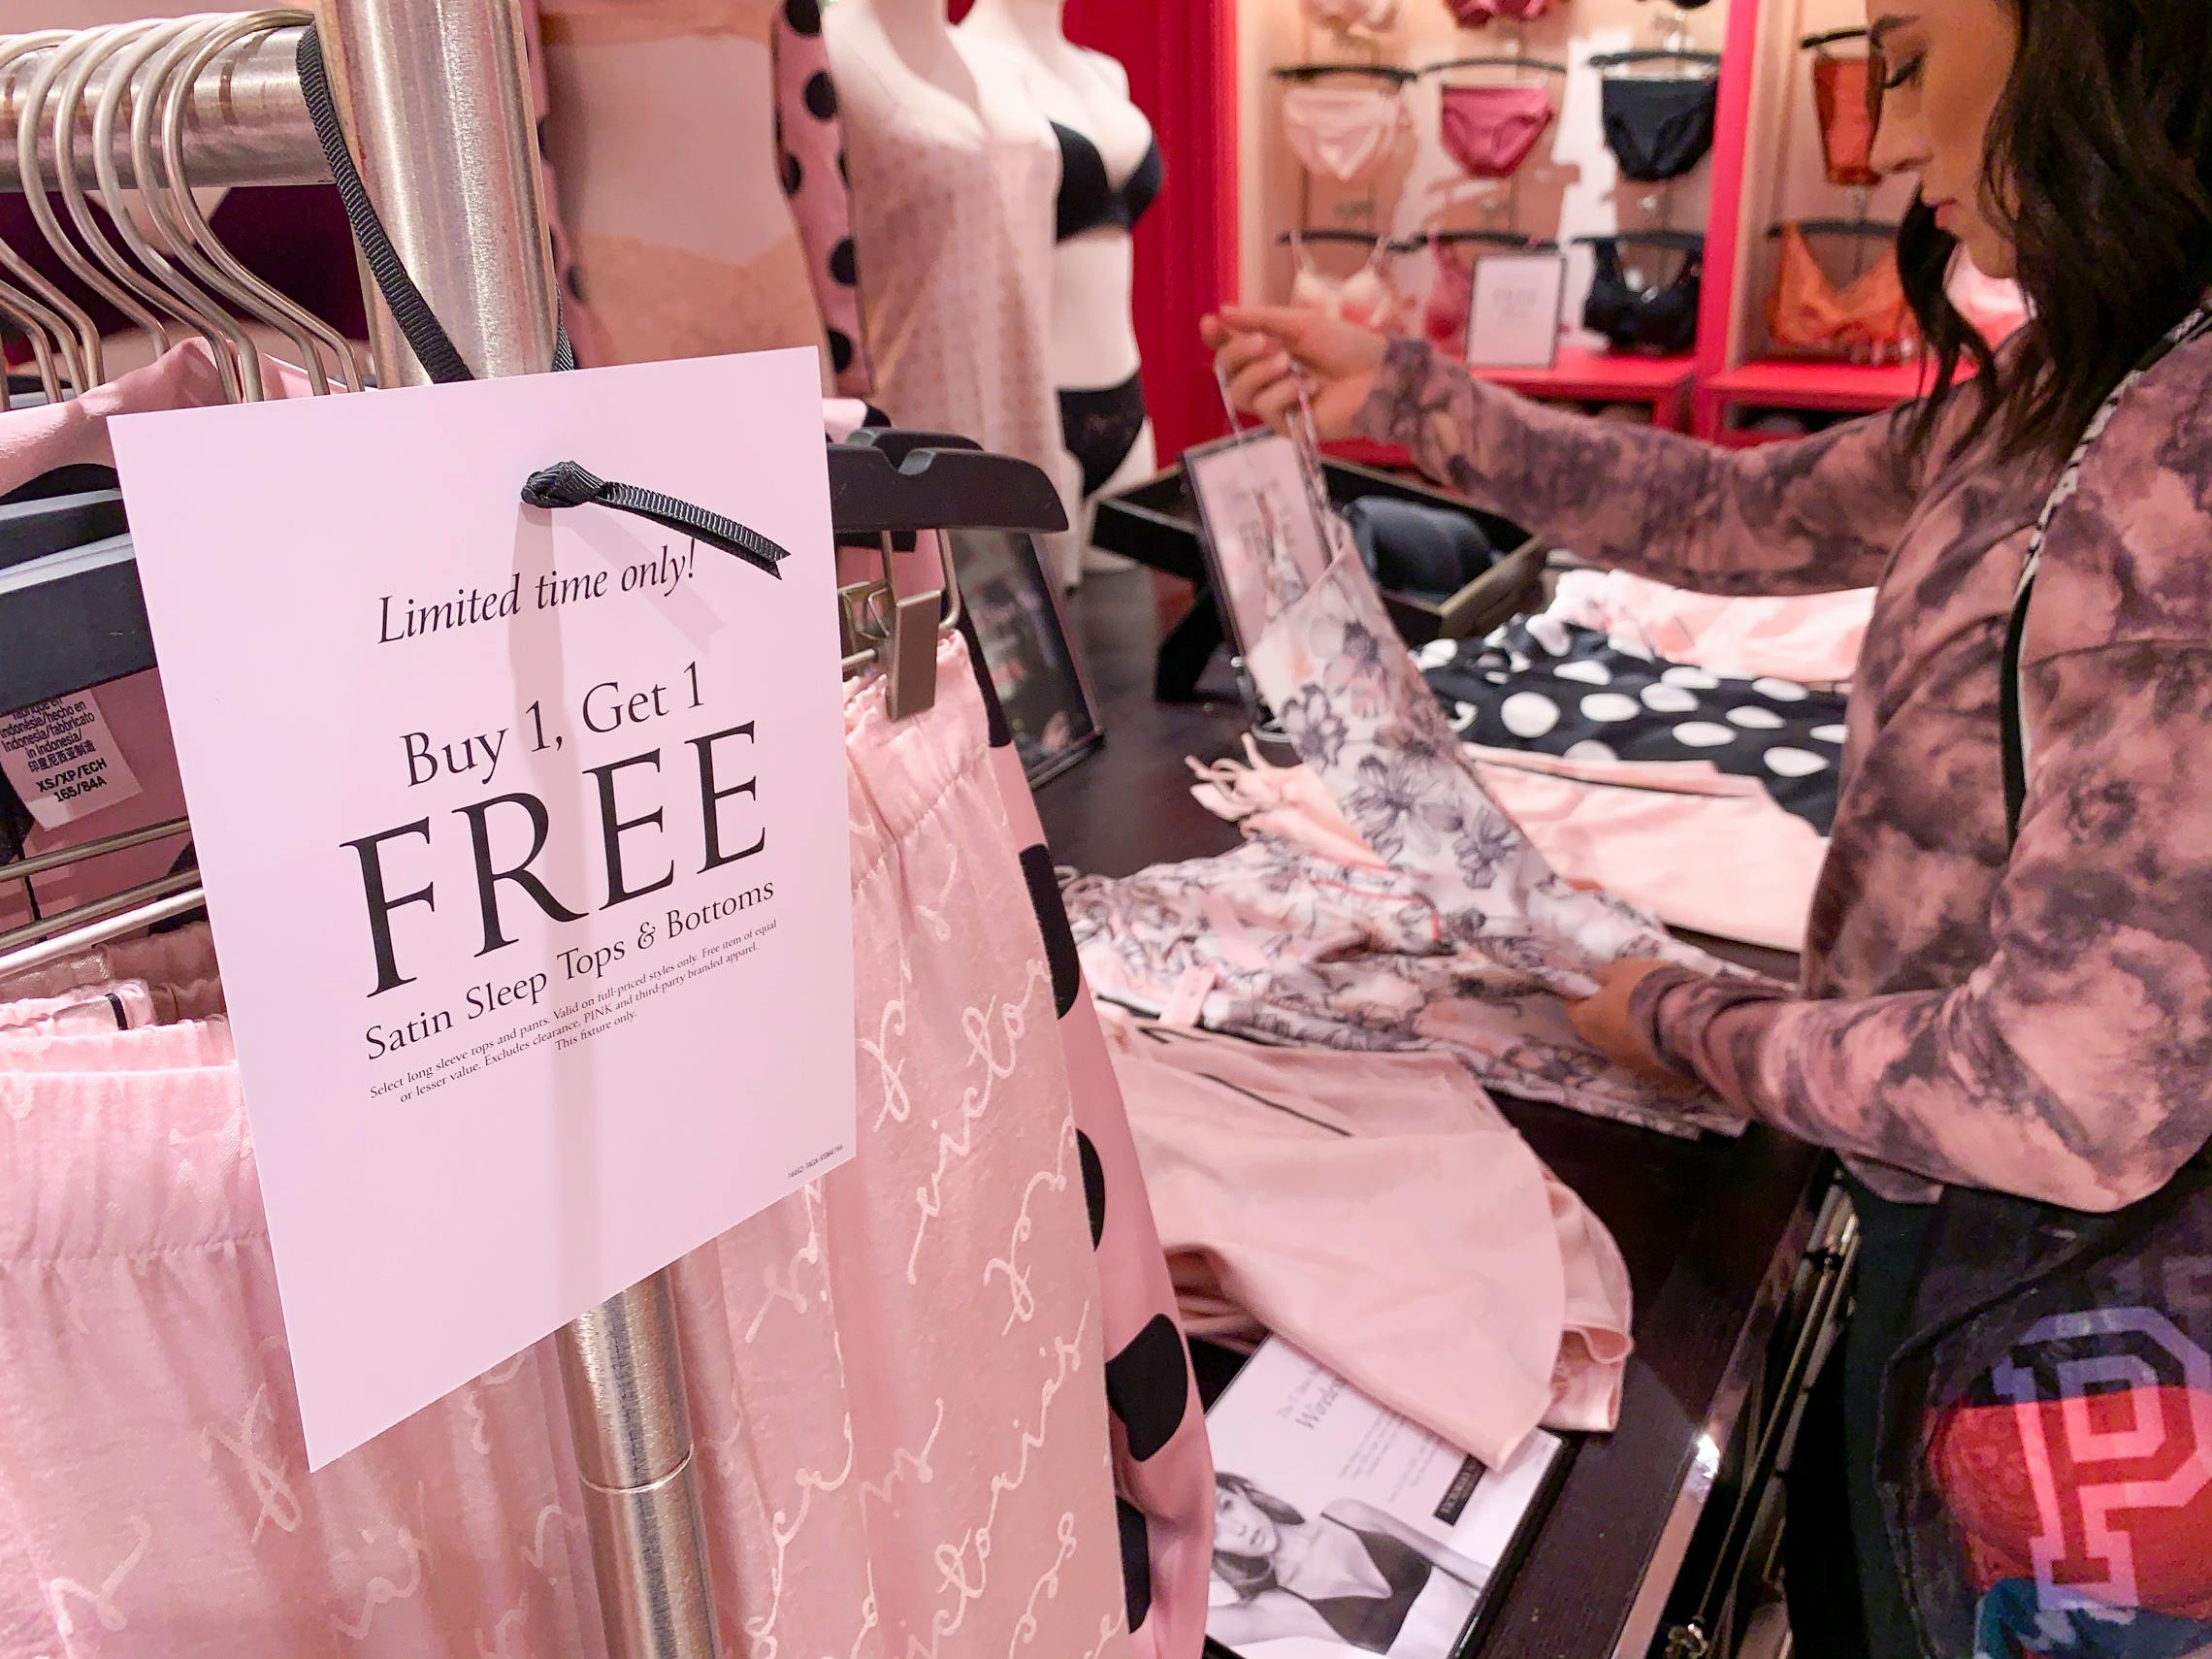 Victoria's Secret on X: #BlackFriday starts NOW! Get your tote